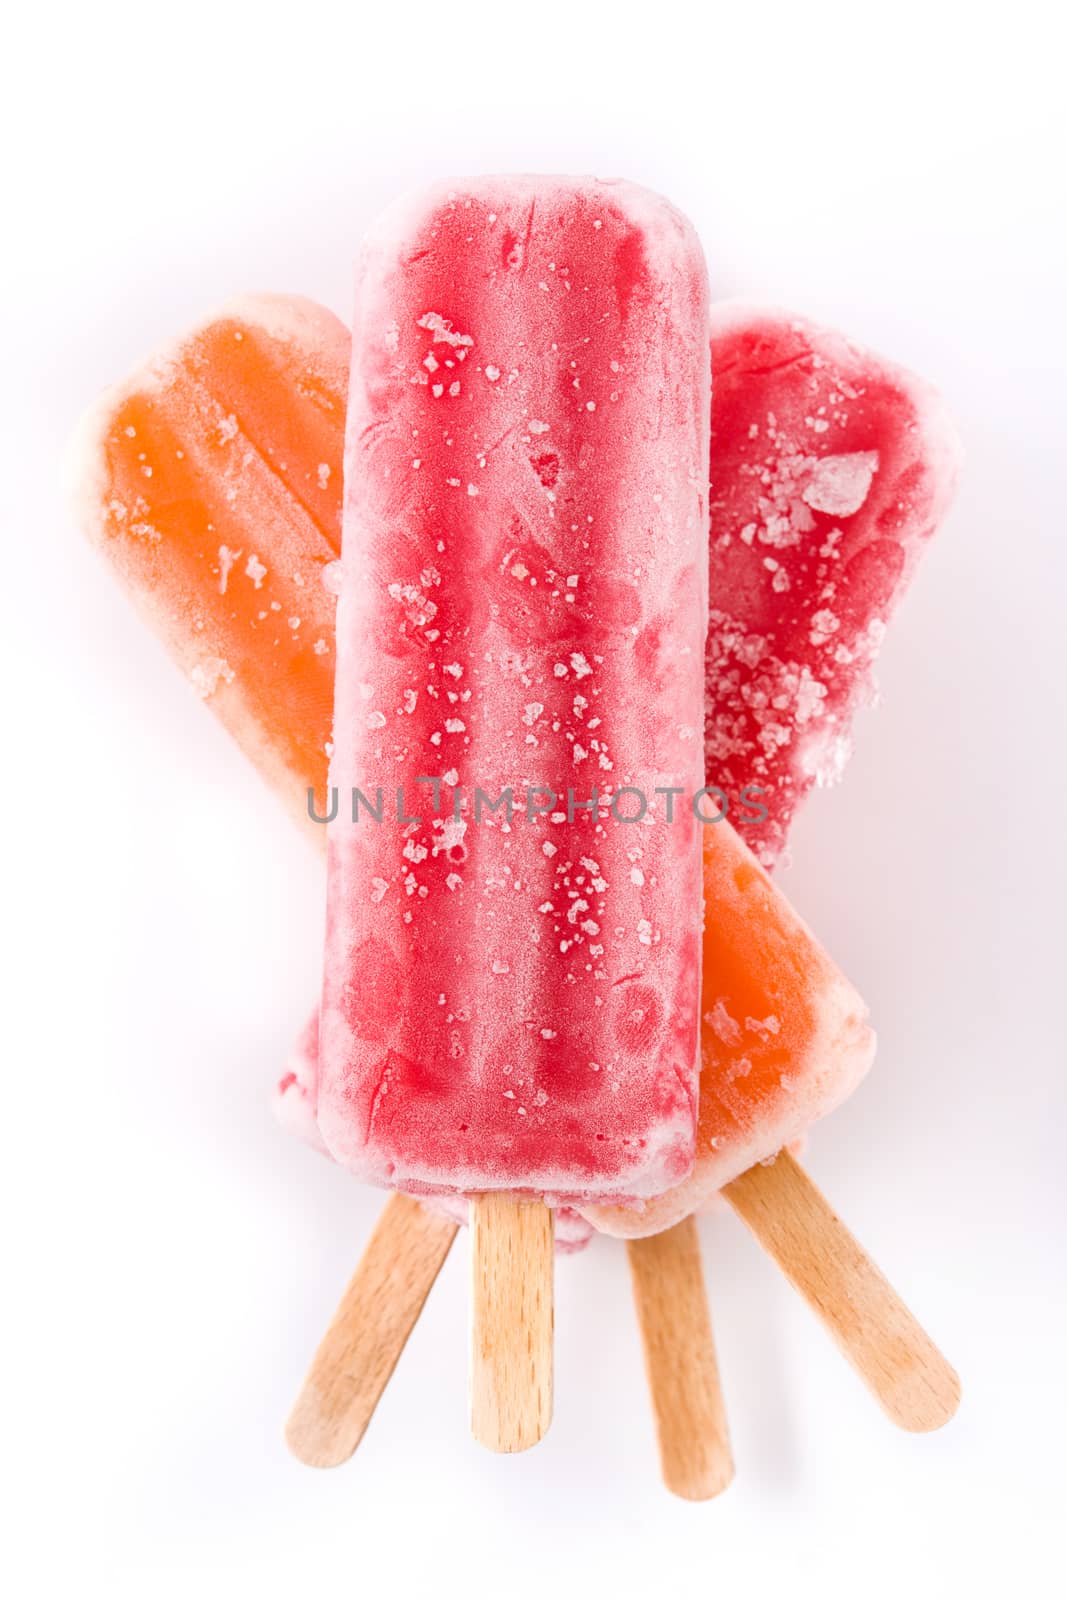 Orange and strawberry popsicles isolated on white background.